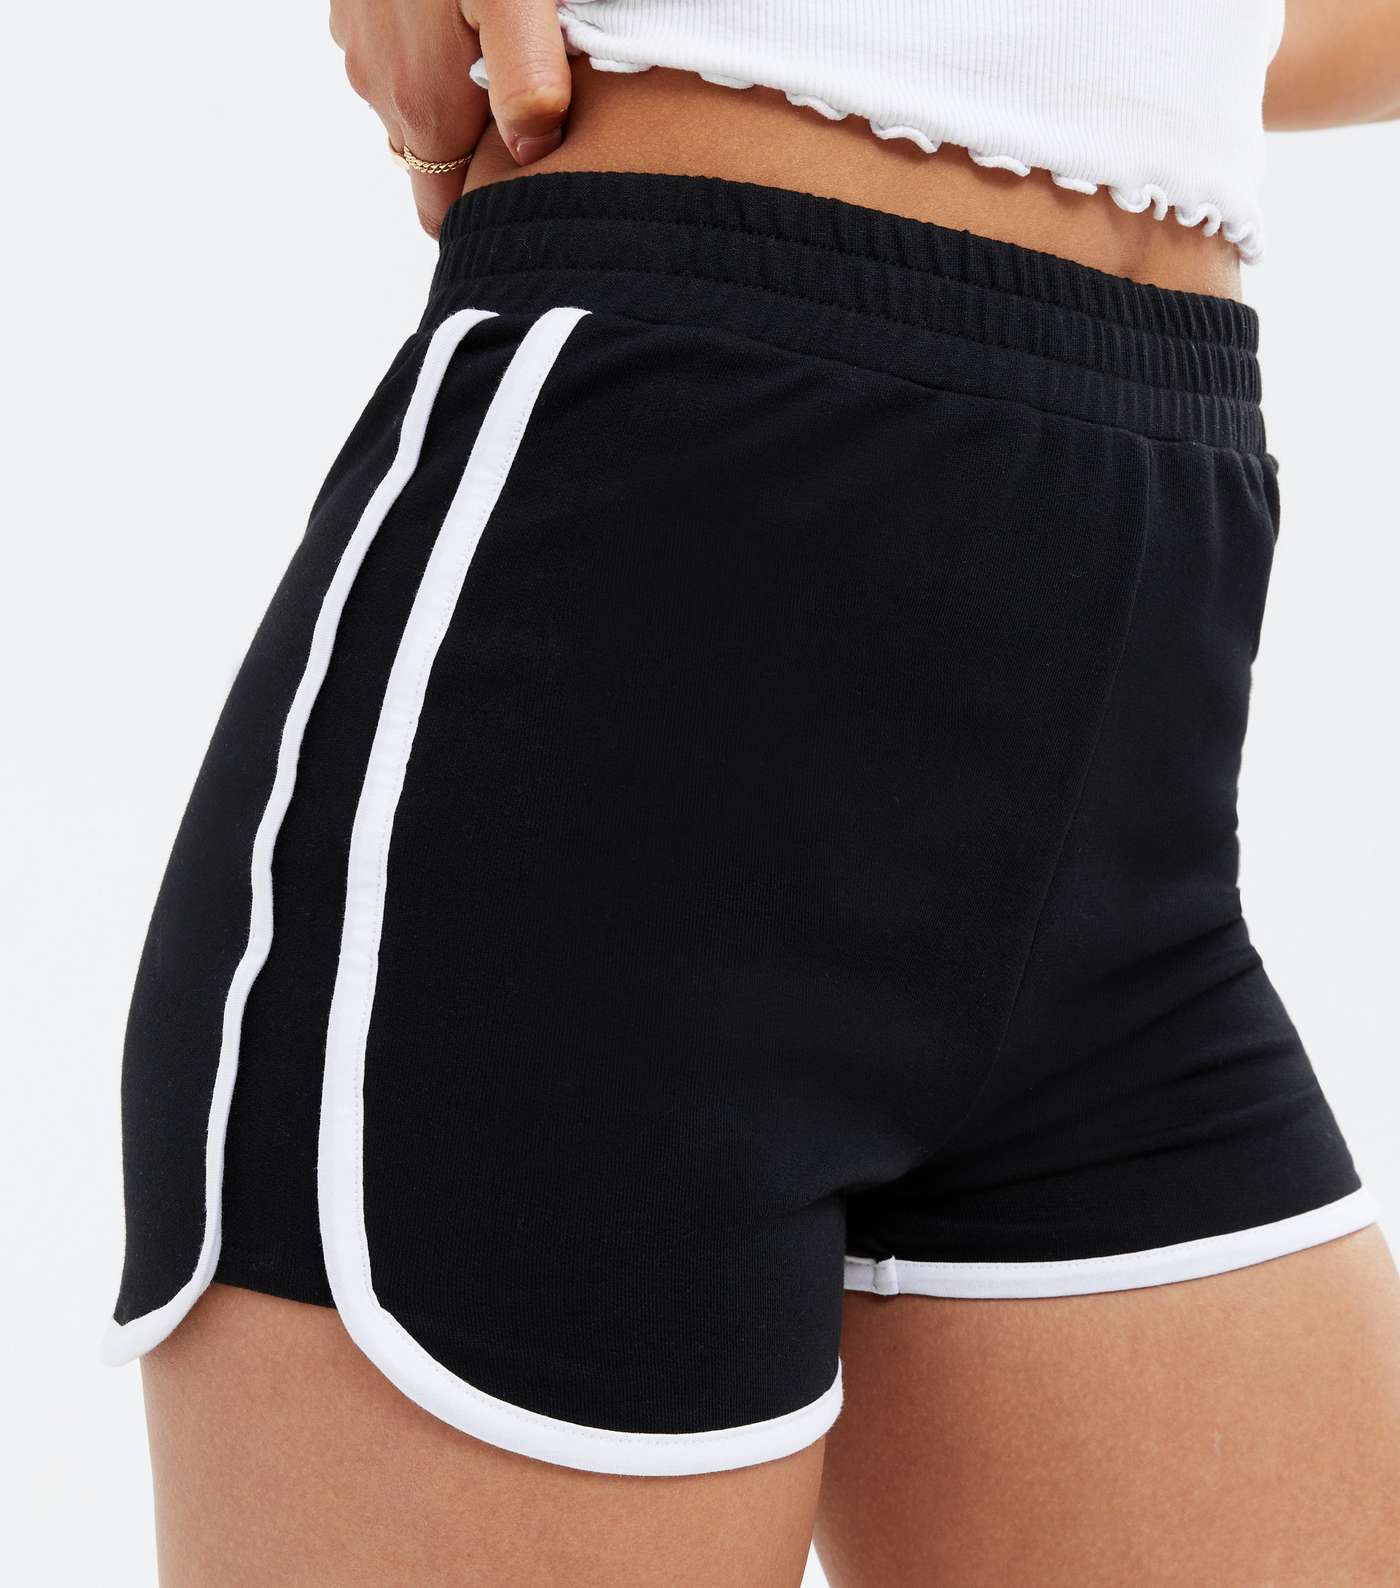 Black Piped Runner Shorts  Image 3